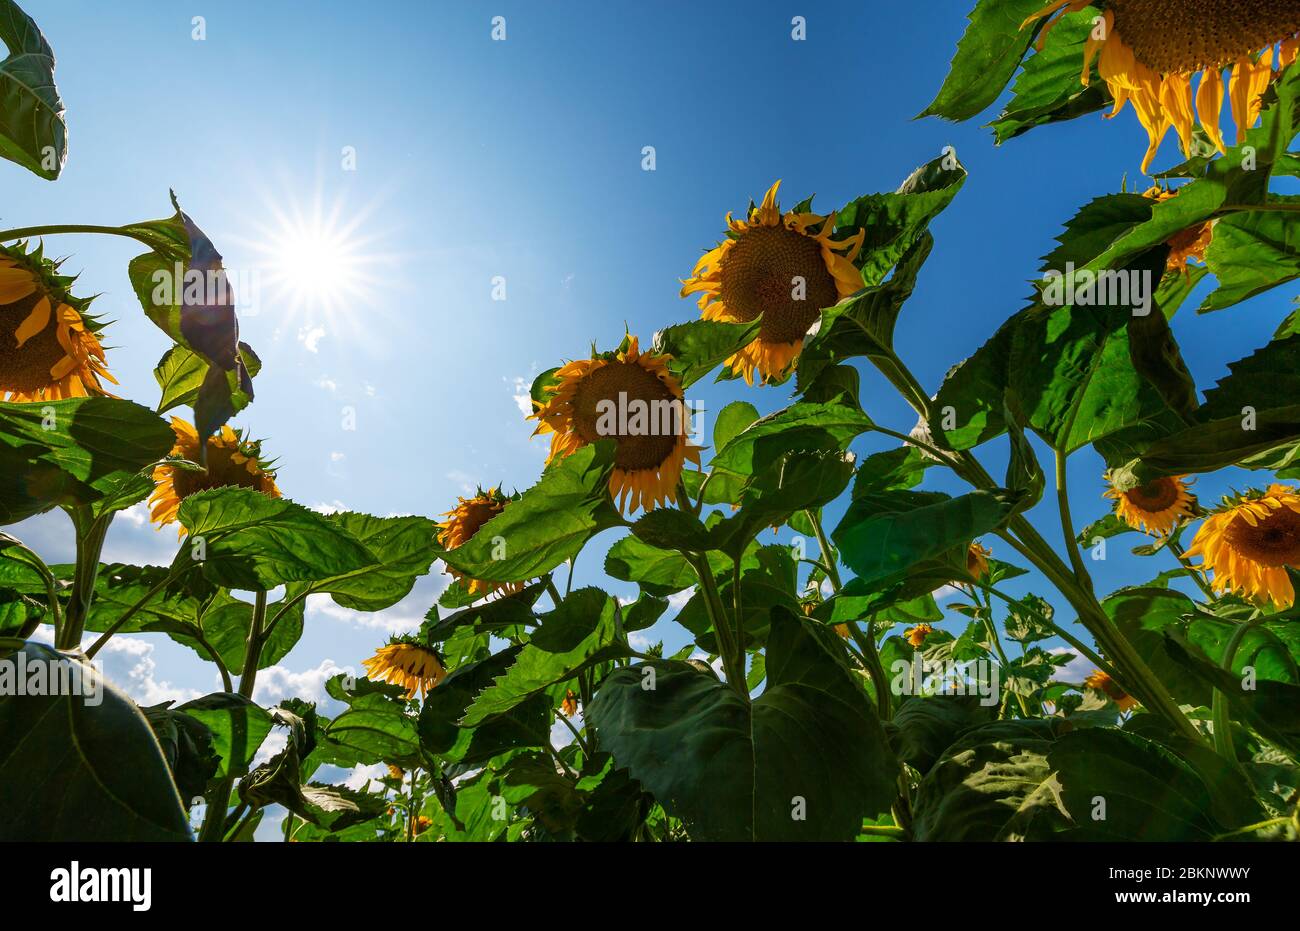 A sunny day in the sunflower field Stock Photo